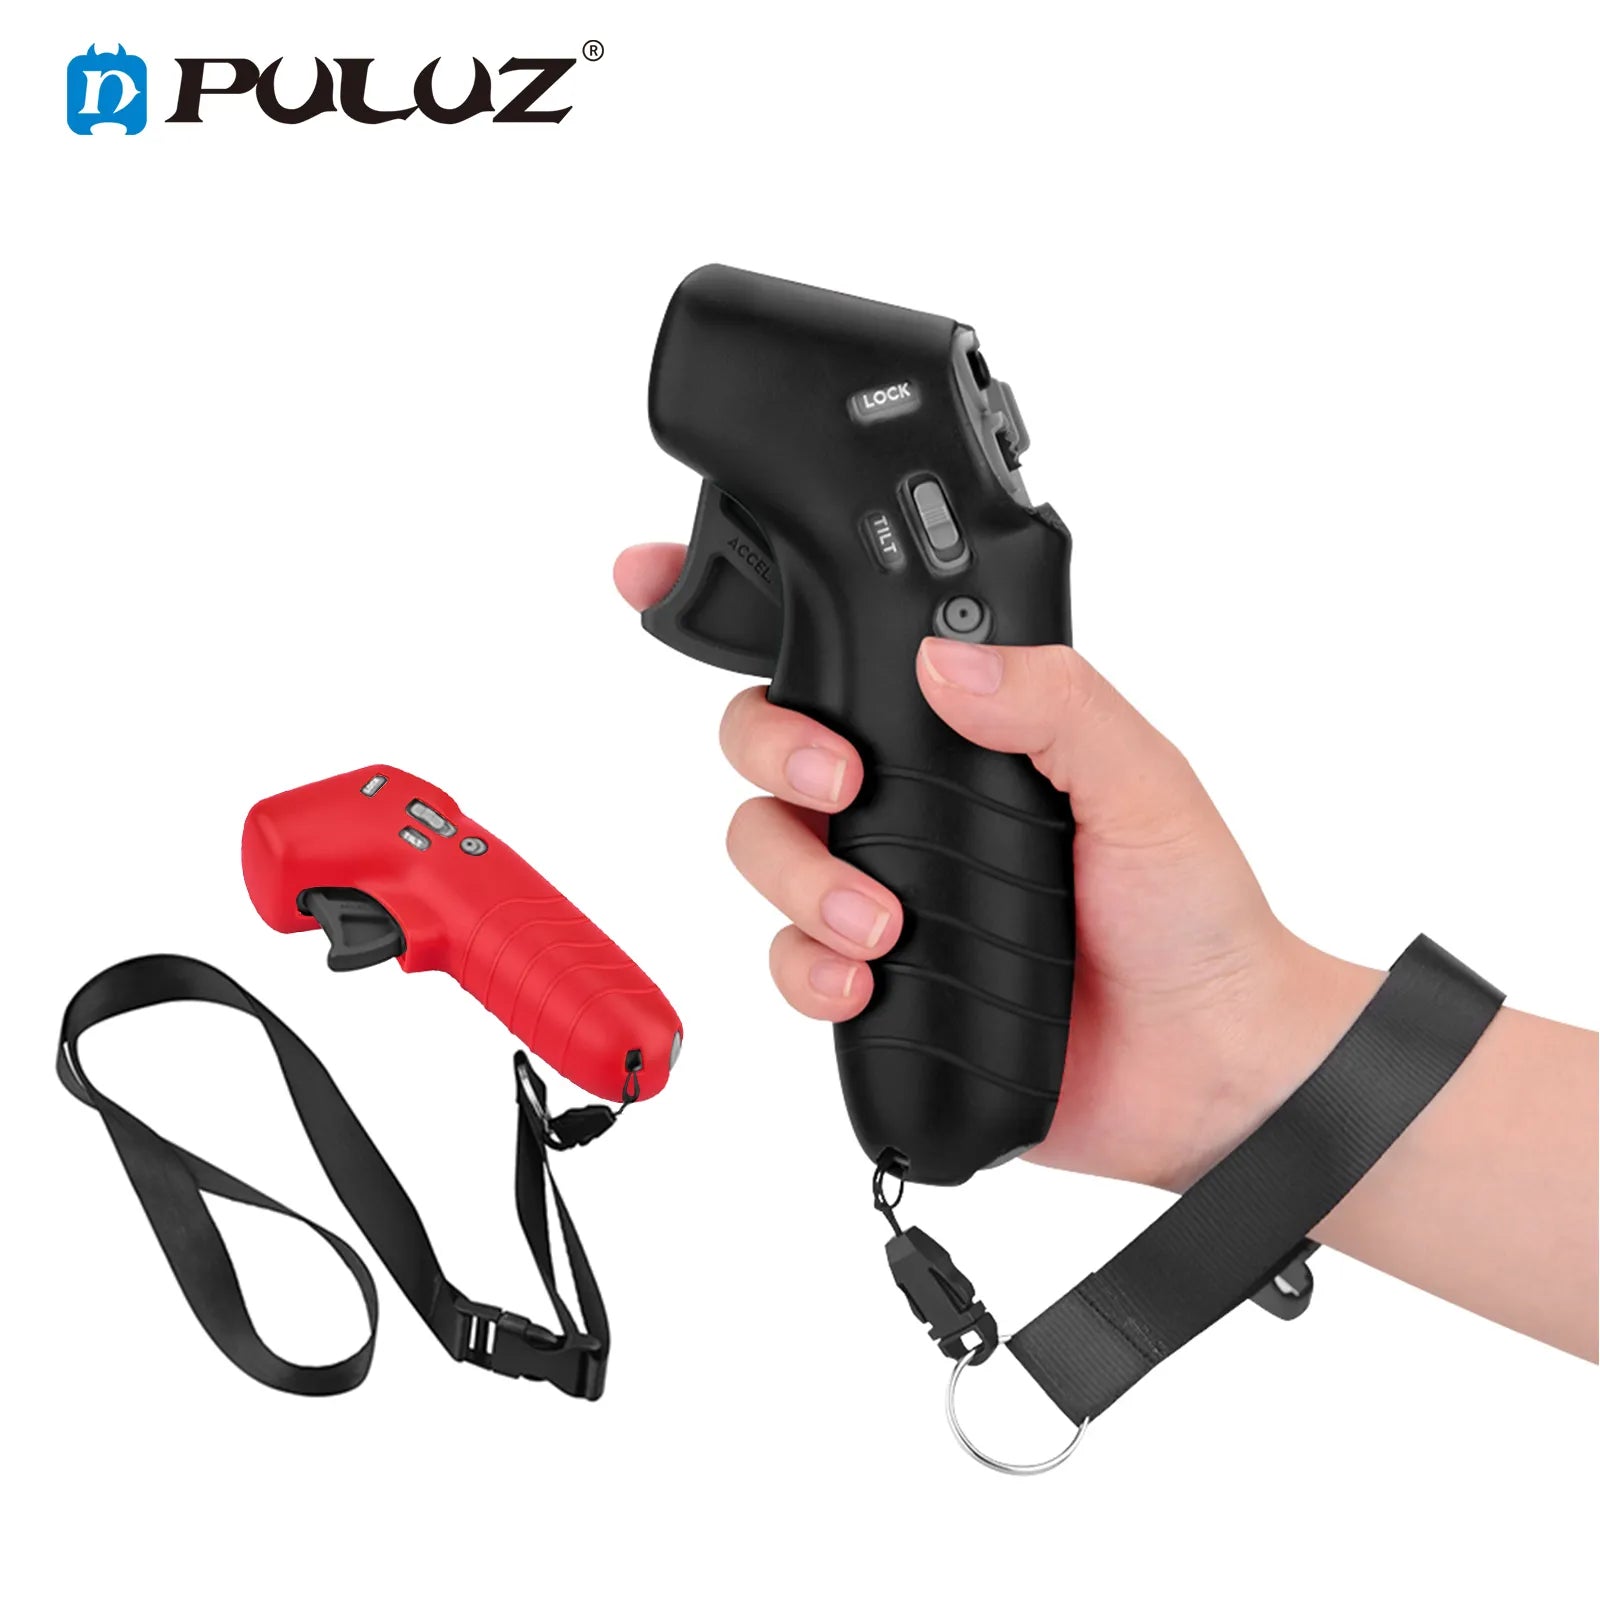 PULUZ Silicone Sleeve Cover For DJI RC Motion 2/DJI Avata/FPV Rocker Protective Skin Case & Neck Strap Accessories